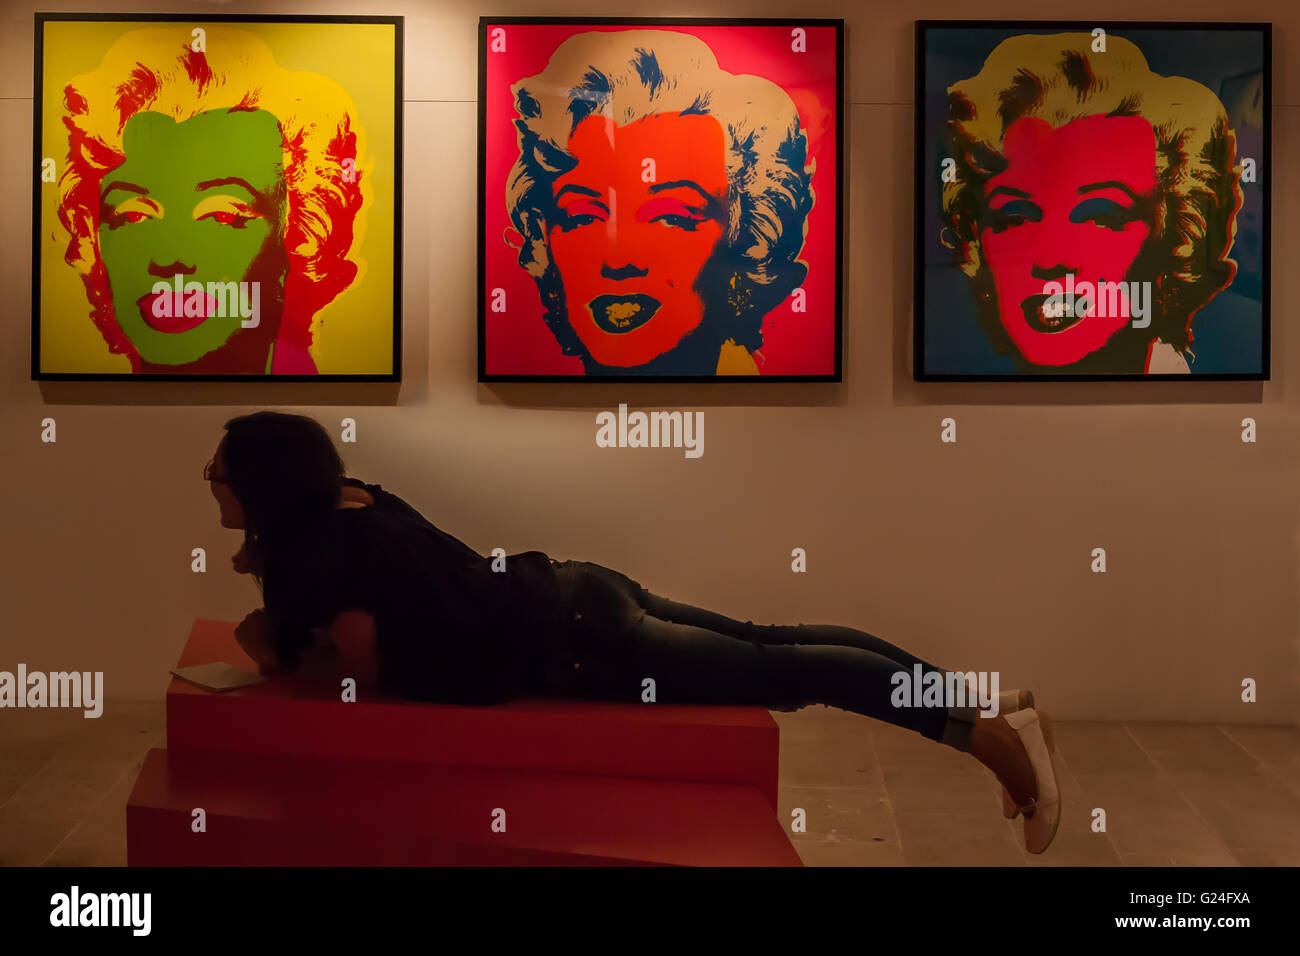 Andy Warhol exhibition, 'I Want to Be a Machine', in the Castello Aragonese, Otranto, Italy: a girl lies under 3 famous screenprints of Marilyn Monroe Stock Photo